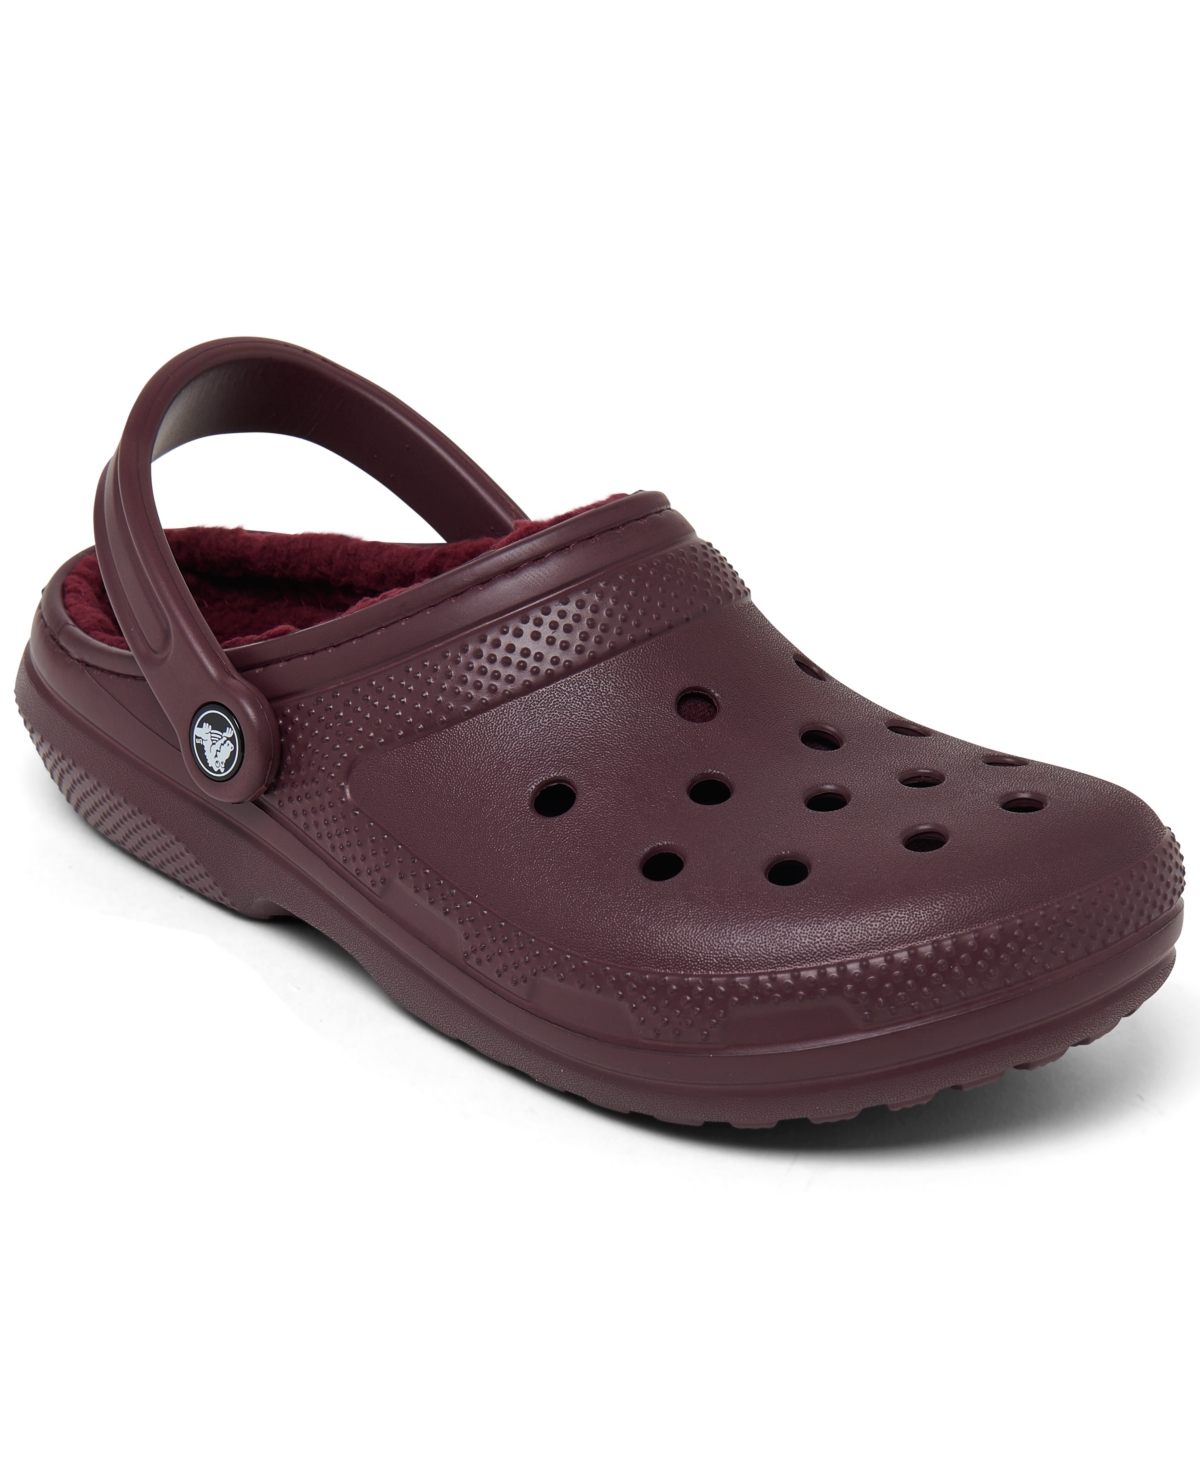 Crocs Men's And Women's Classic Lined Clogs From Finish Line In Dark Cherry